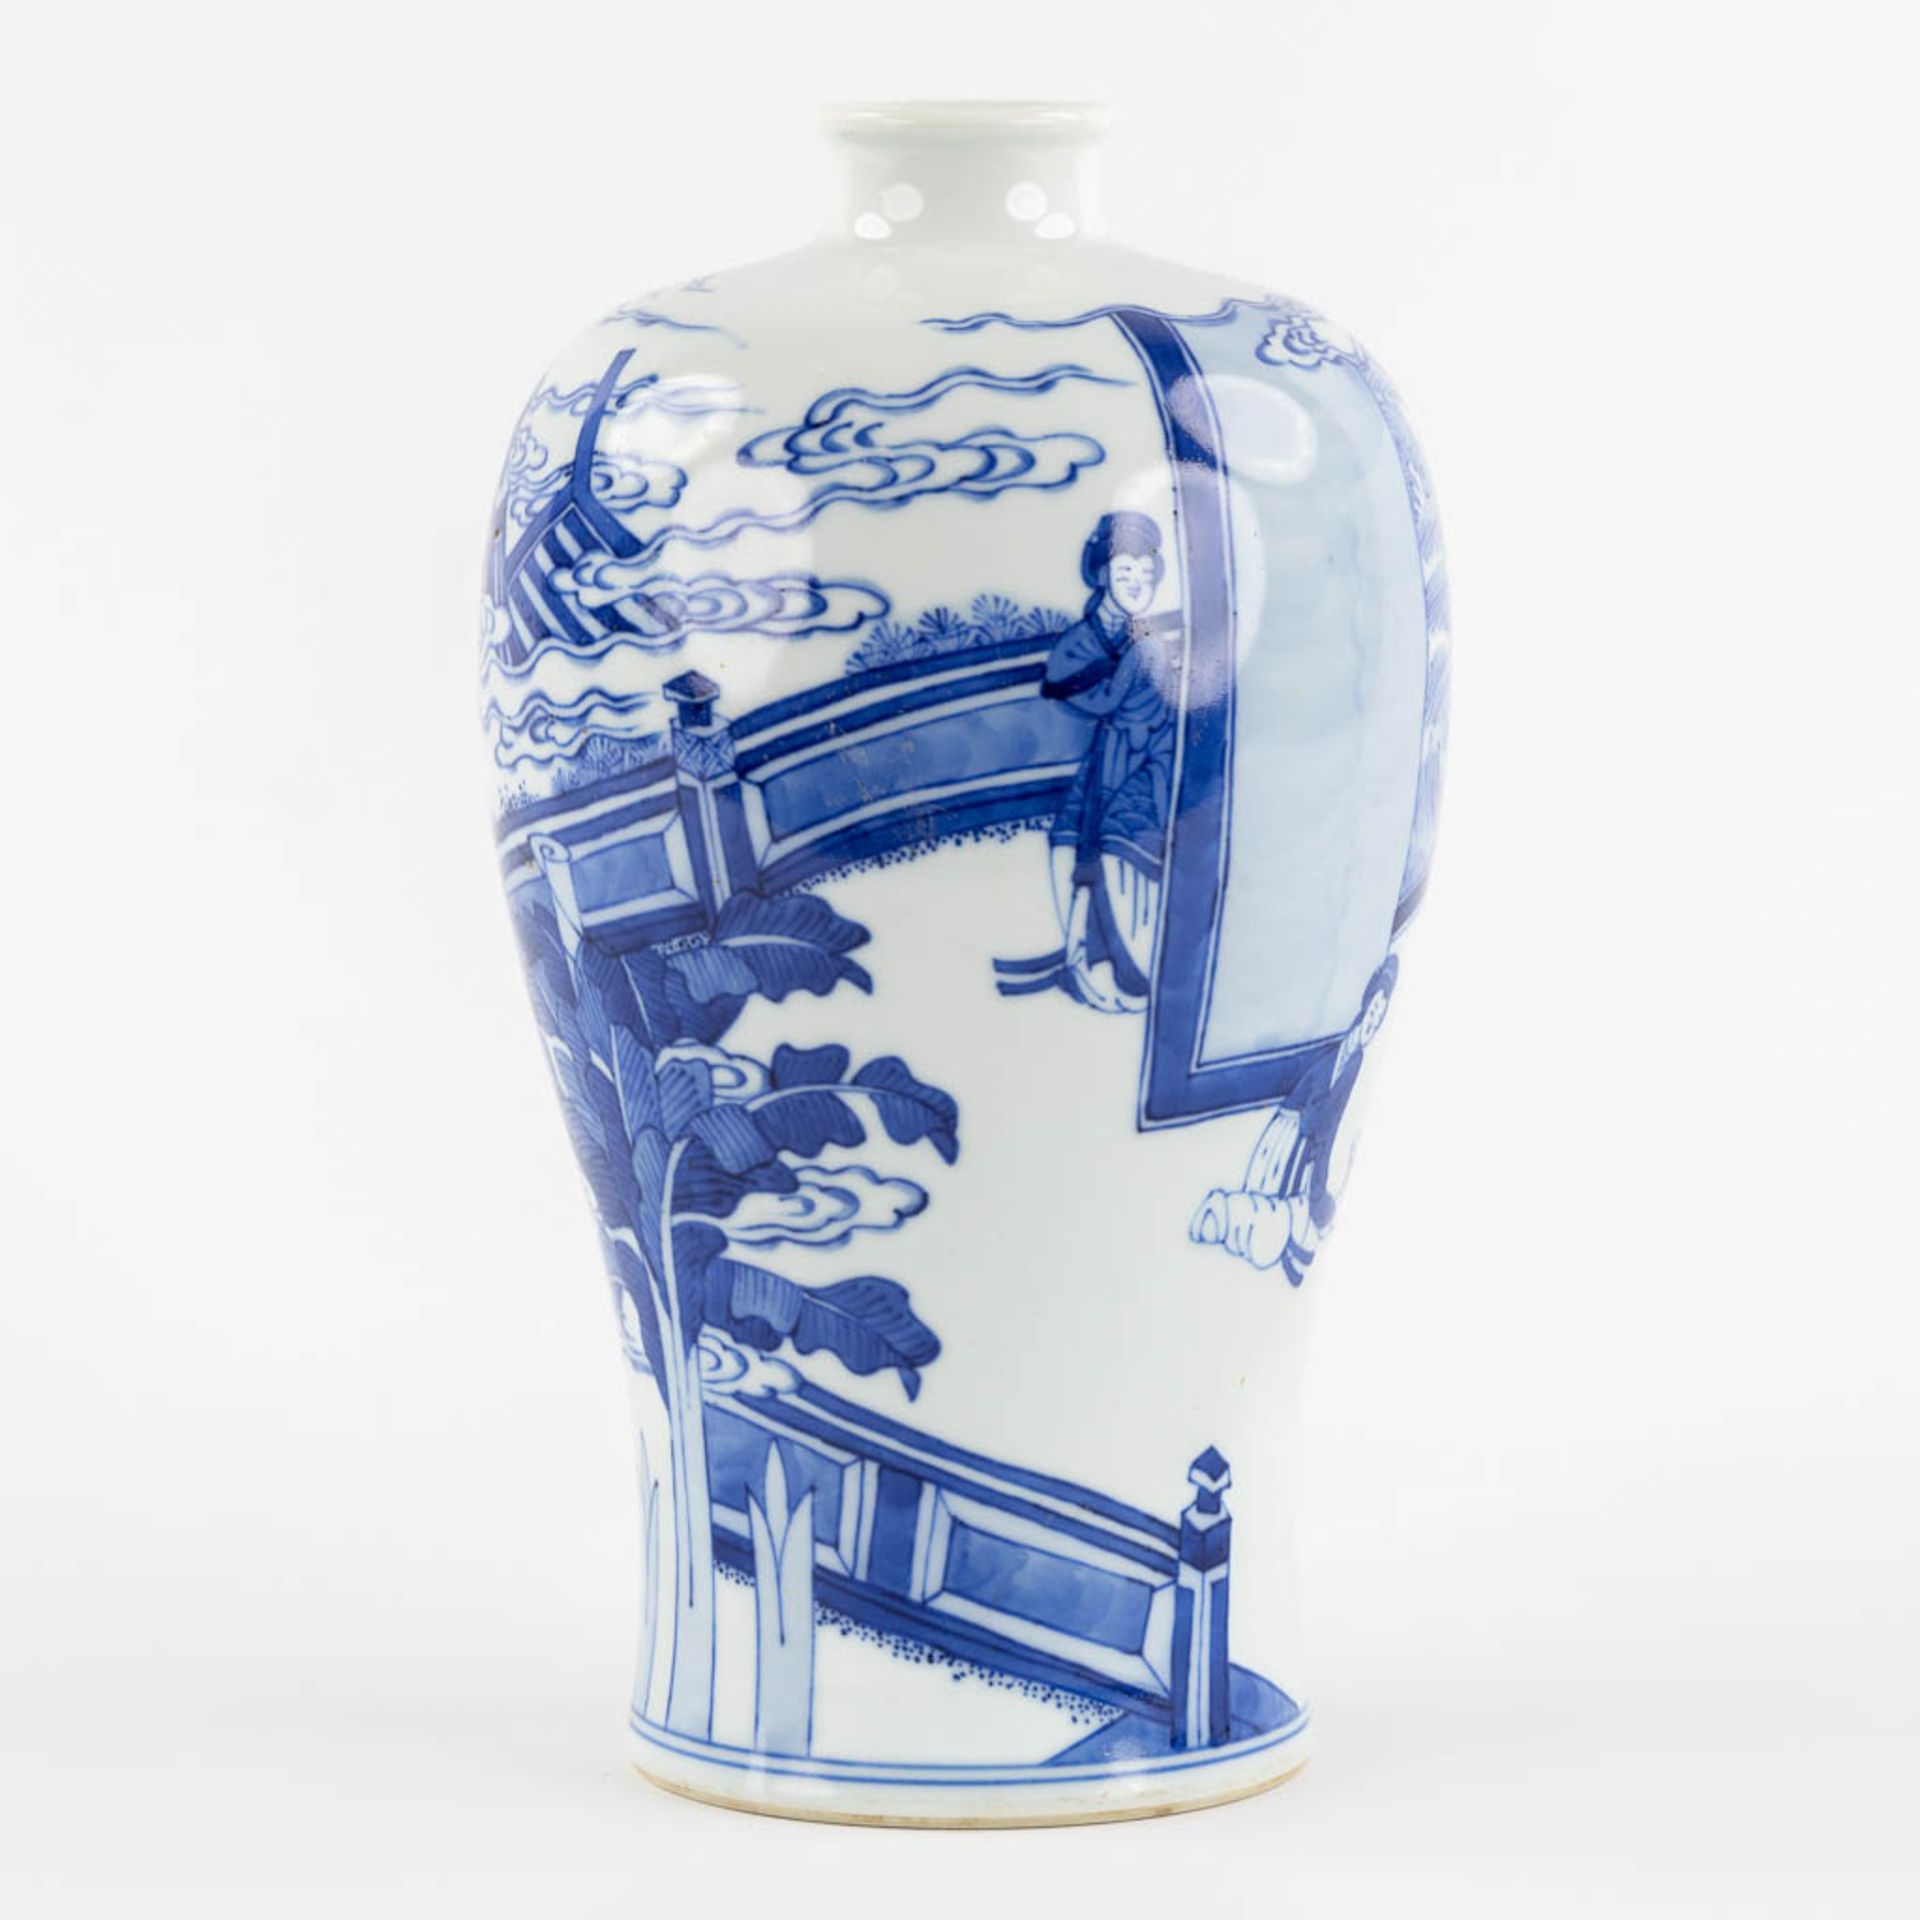 A Chinese 'Meiping' vase, blue-white decor. 20th C. (H:25 x D:15 cm) - Image 6 of 14